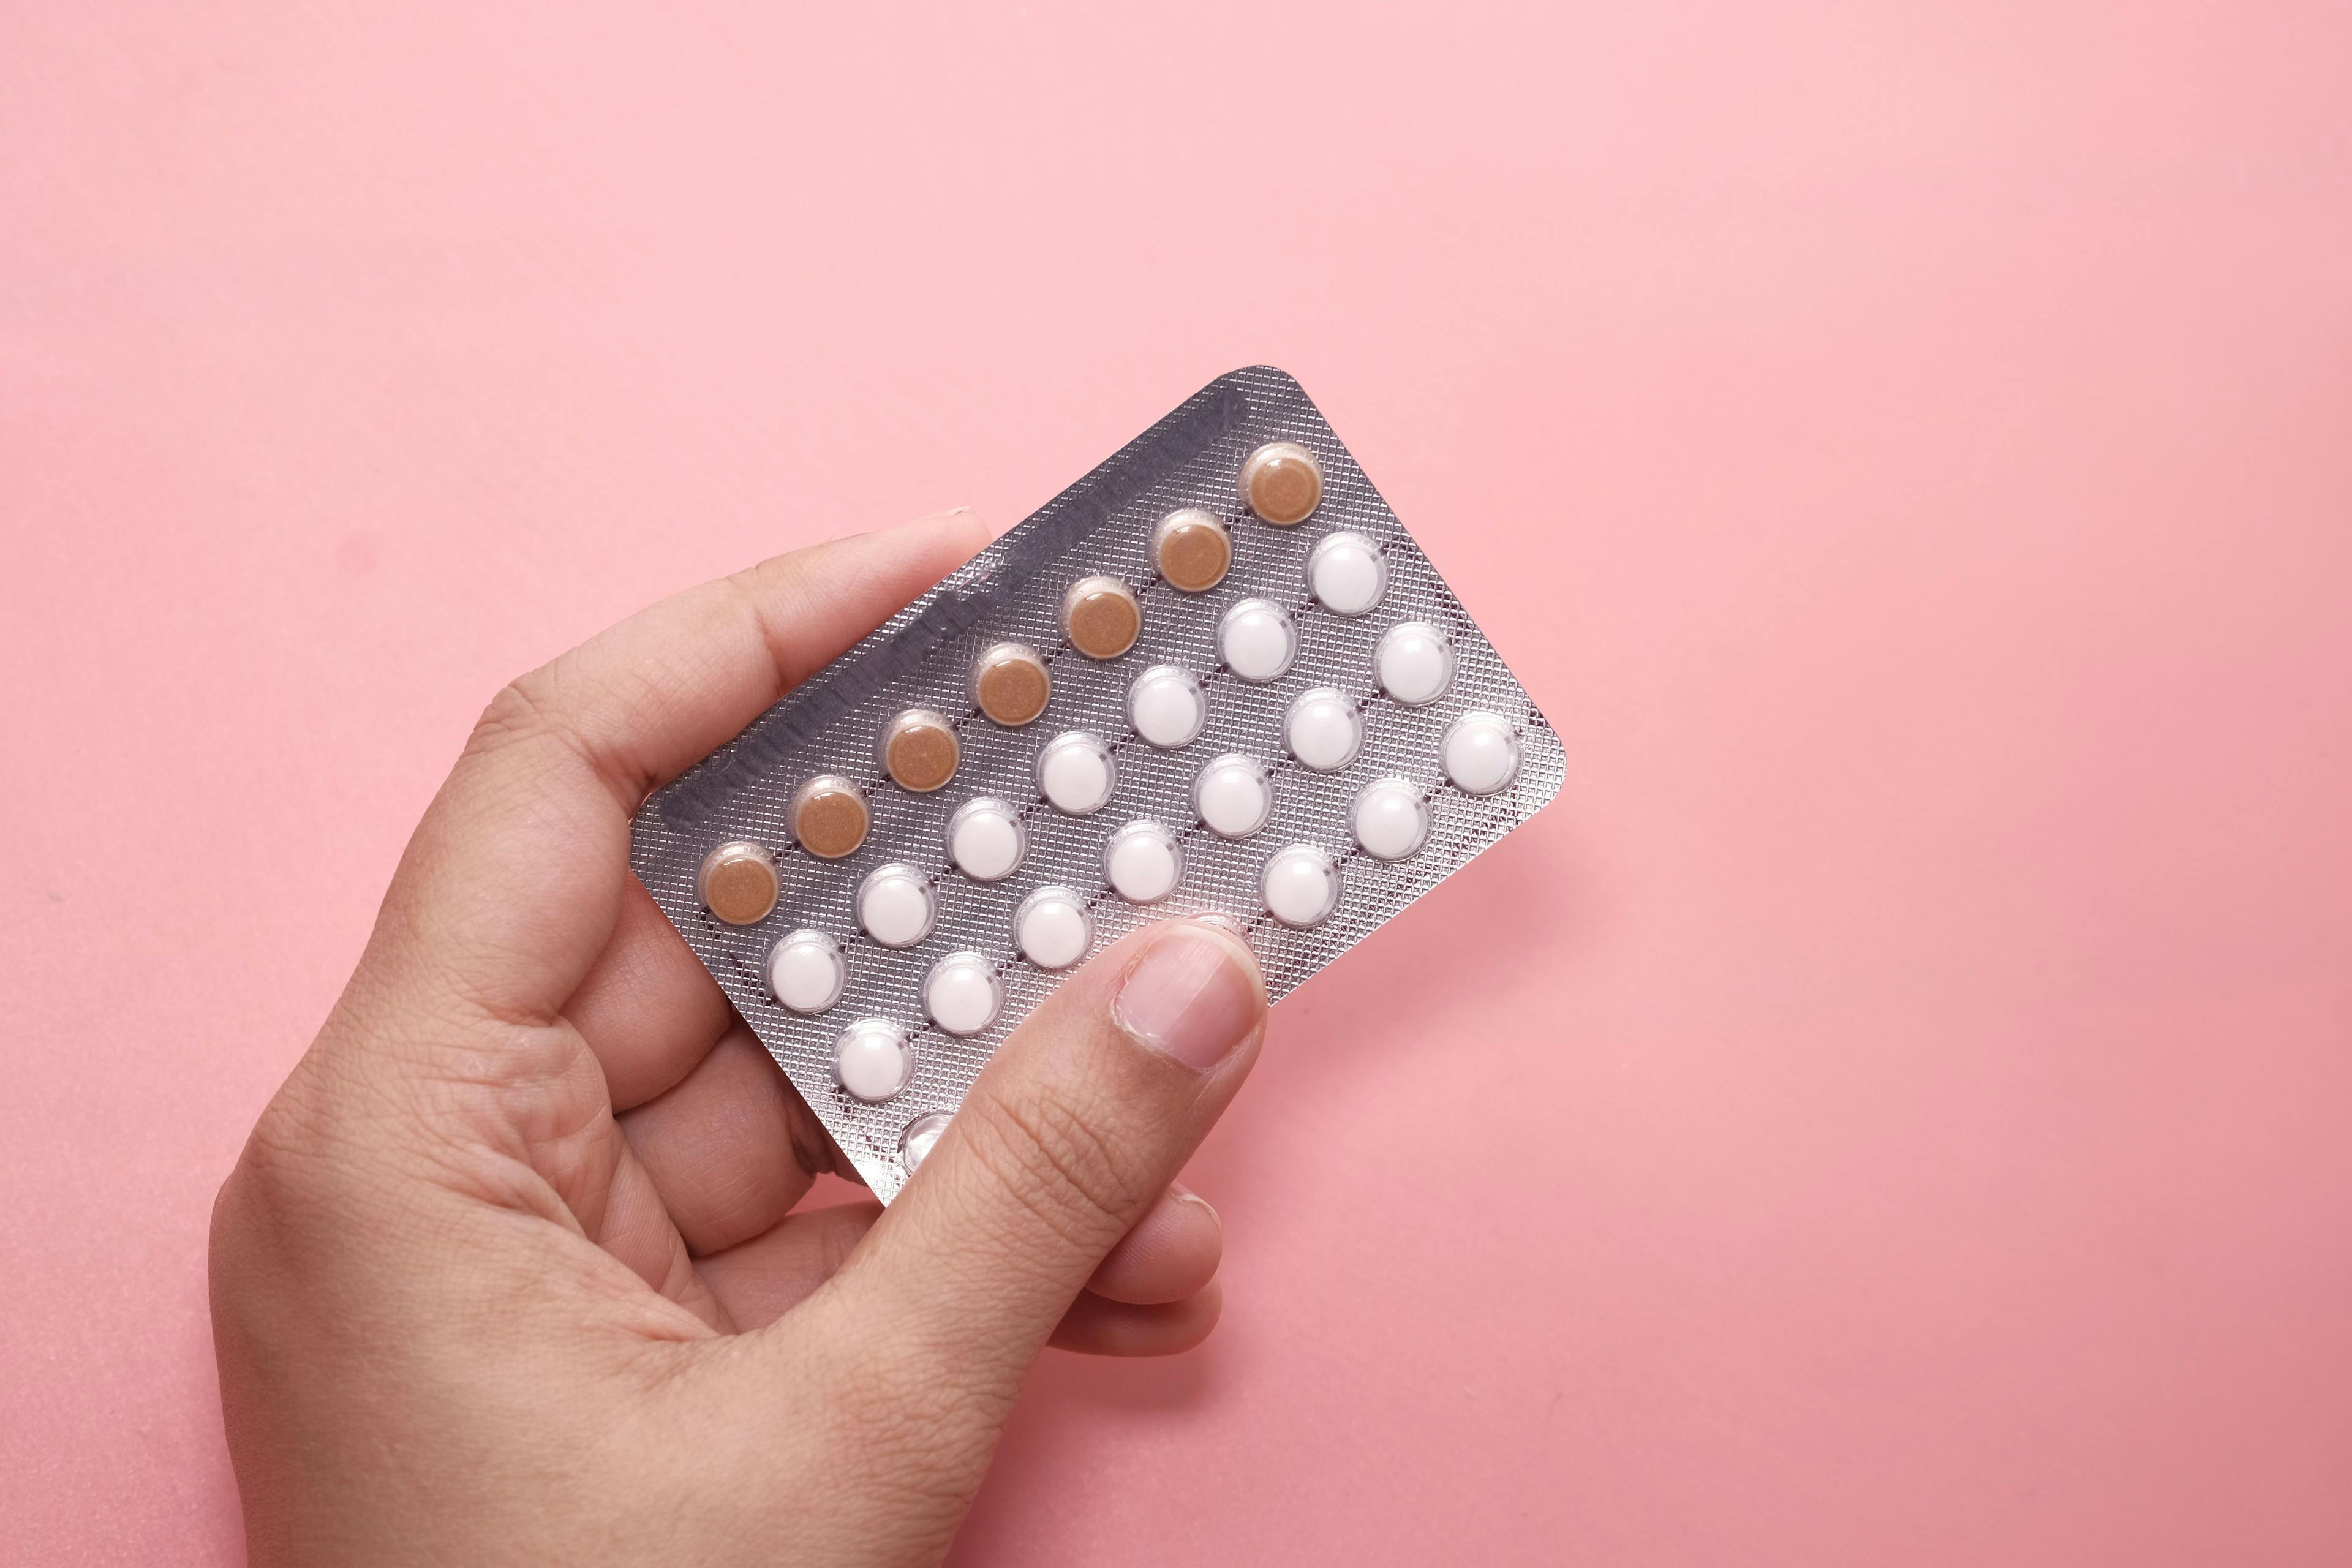 As Access to Contraception Expands, Pharmacists Can Play a Key Role